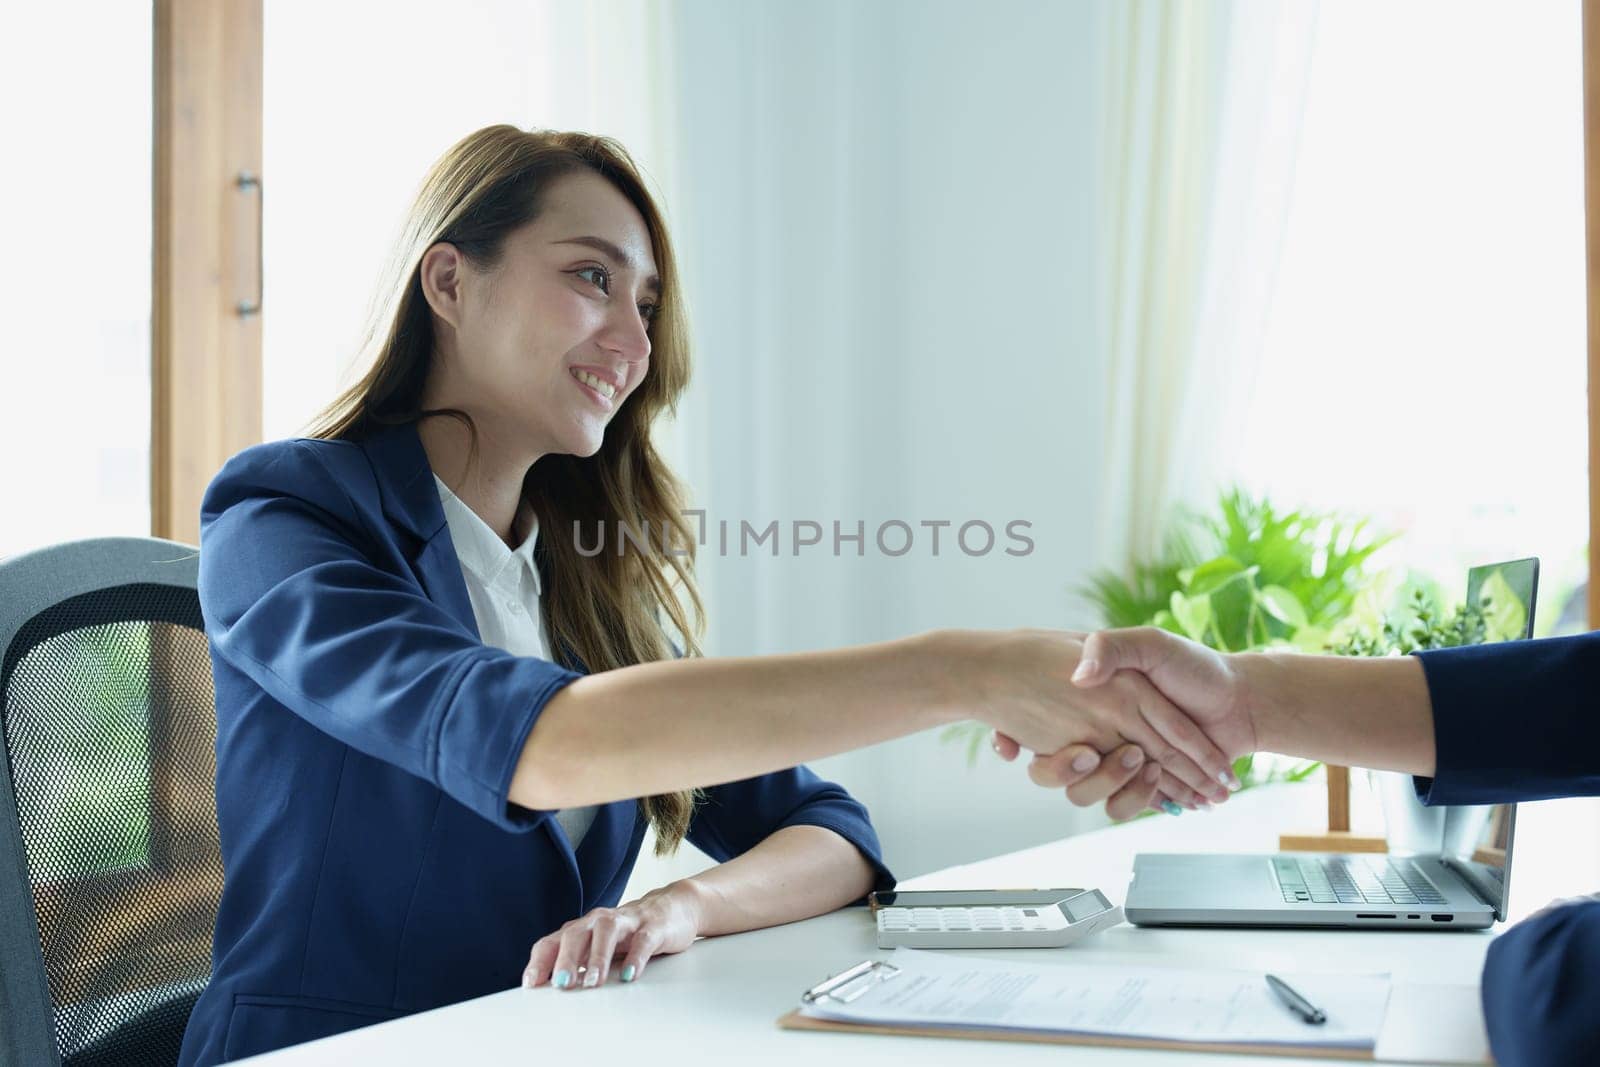 Asian entrepreneurs handshakes to congratulate the agreement between the two companies to enhance investment and financial strength. deal concept by Manastrong